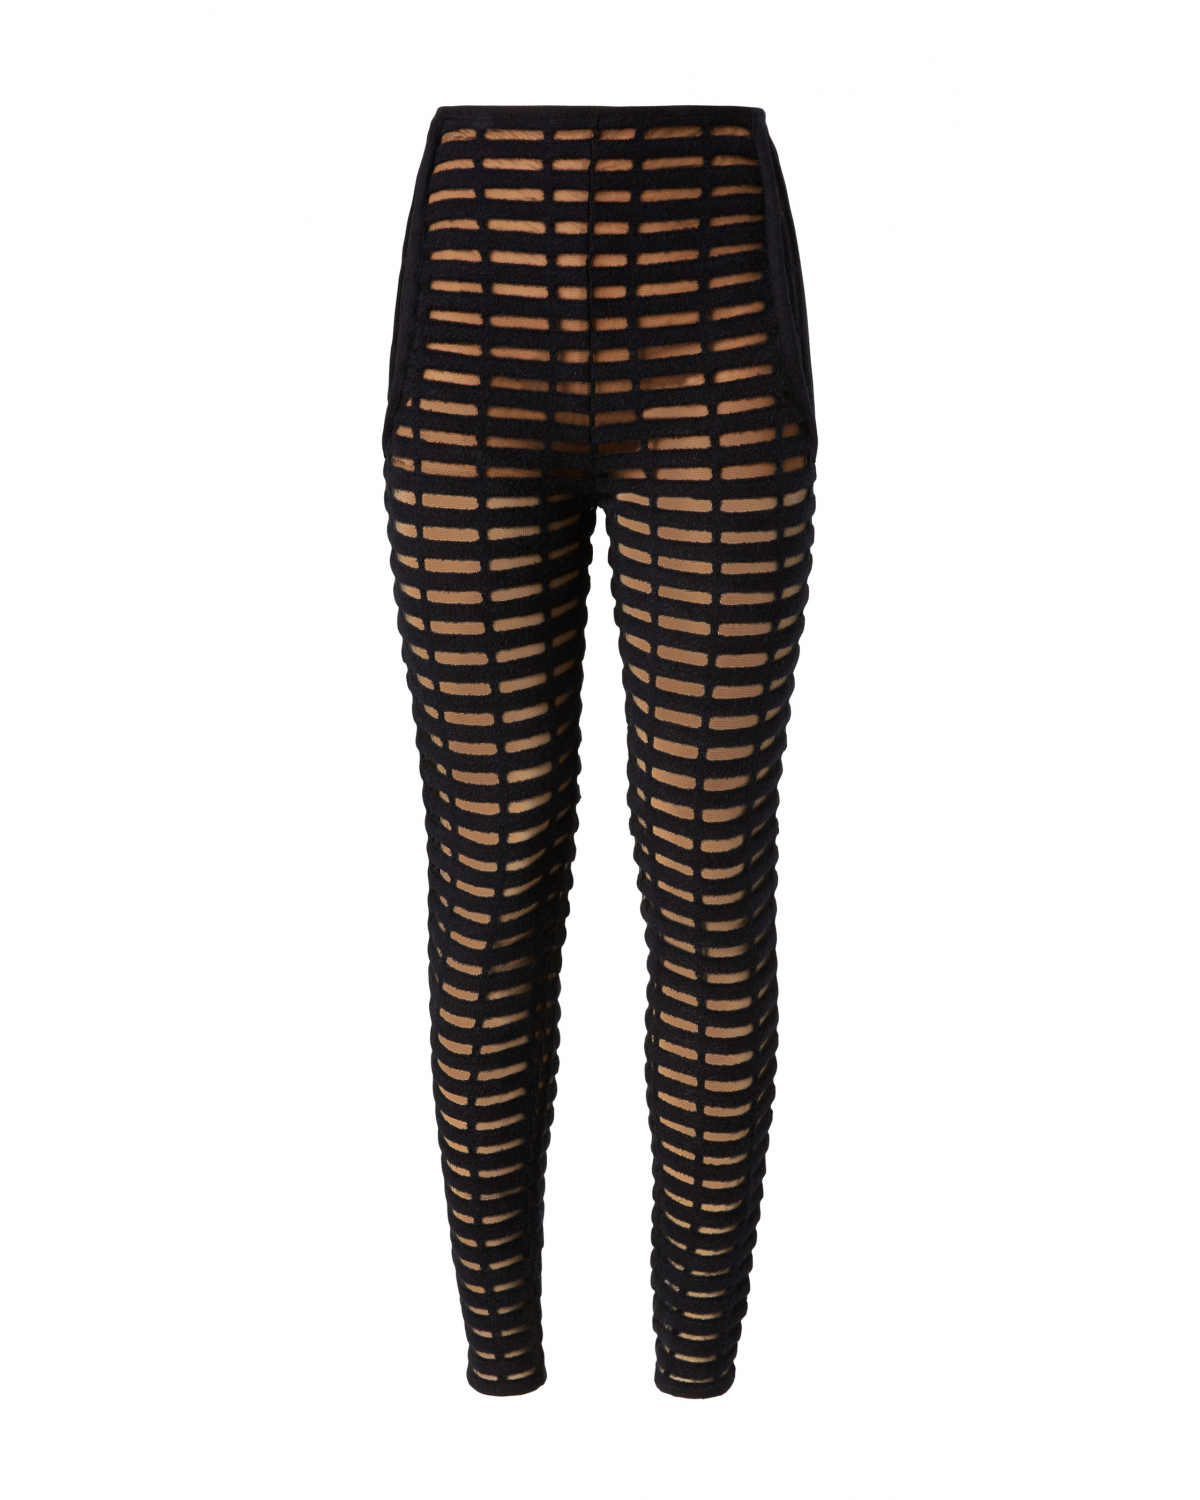 Black knit iconic leggings | Iconic Capsule Collection, 73_74 | Genny